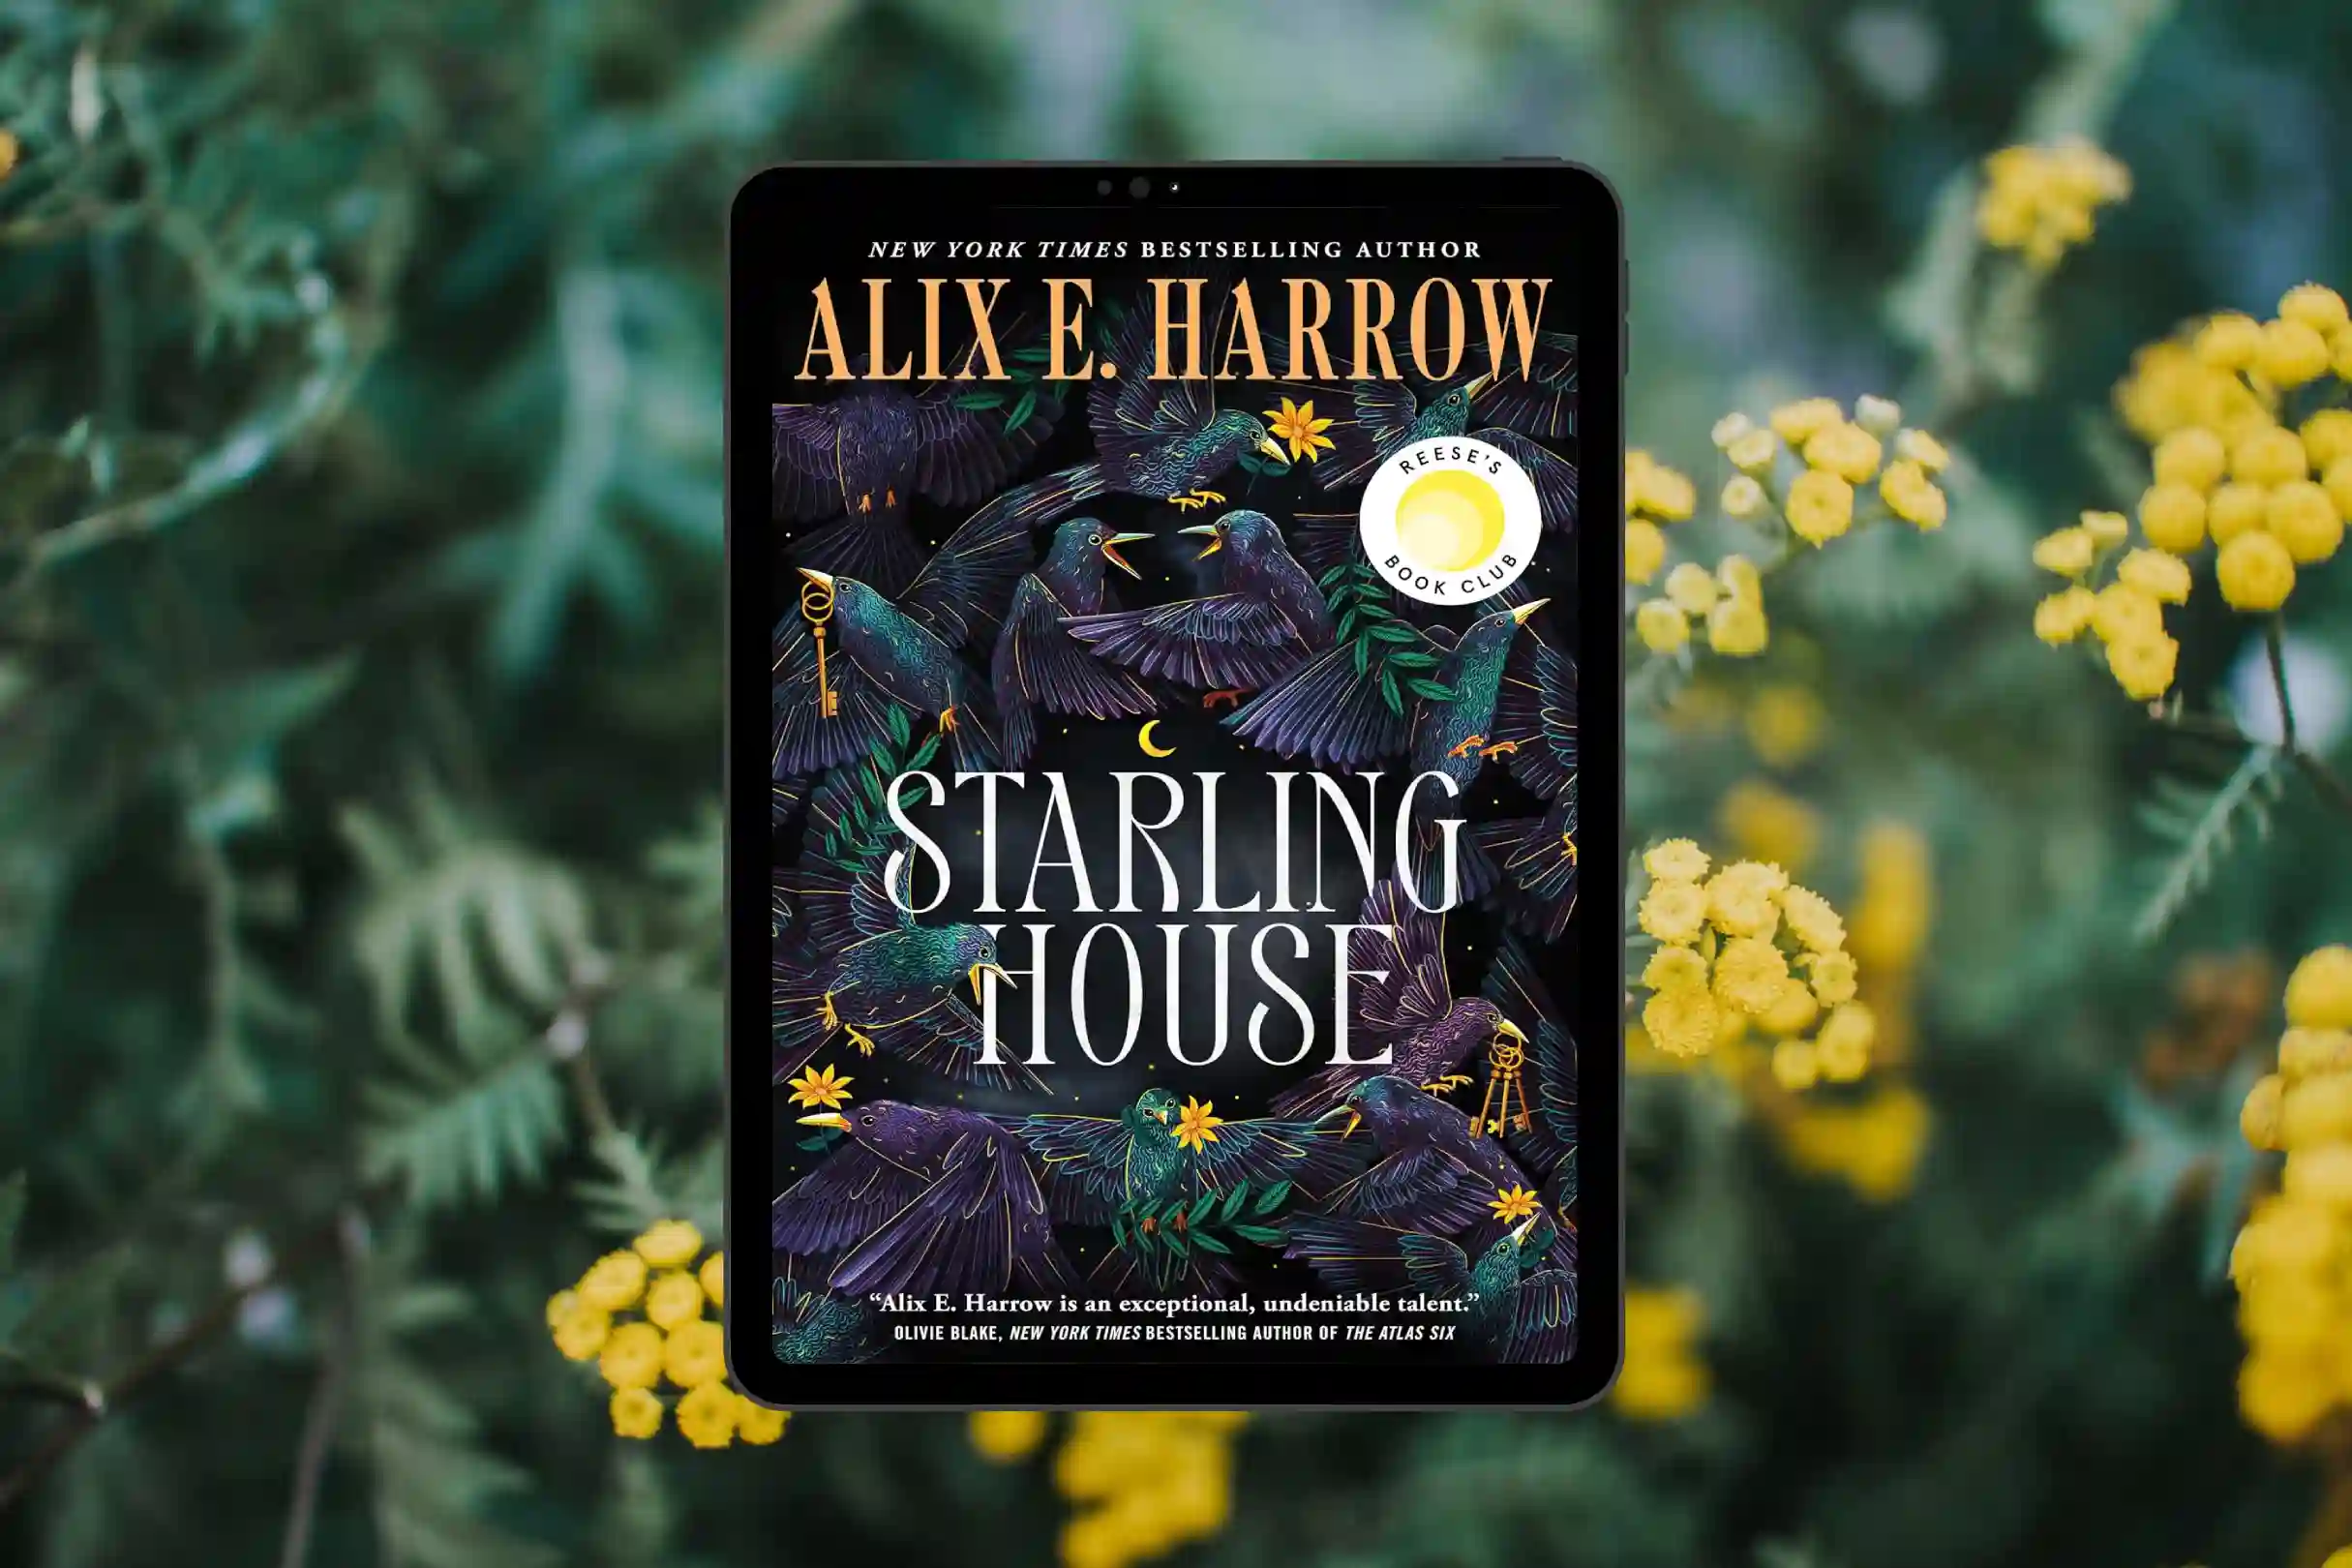 Book Review: Starling House by Alix E. Harrow